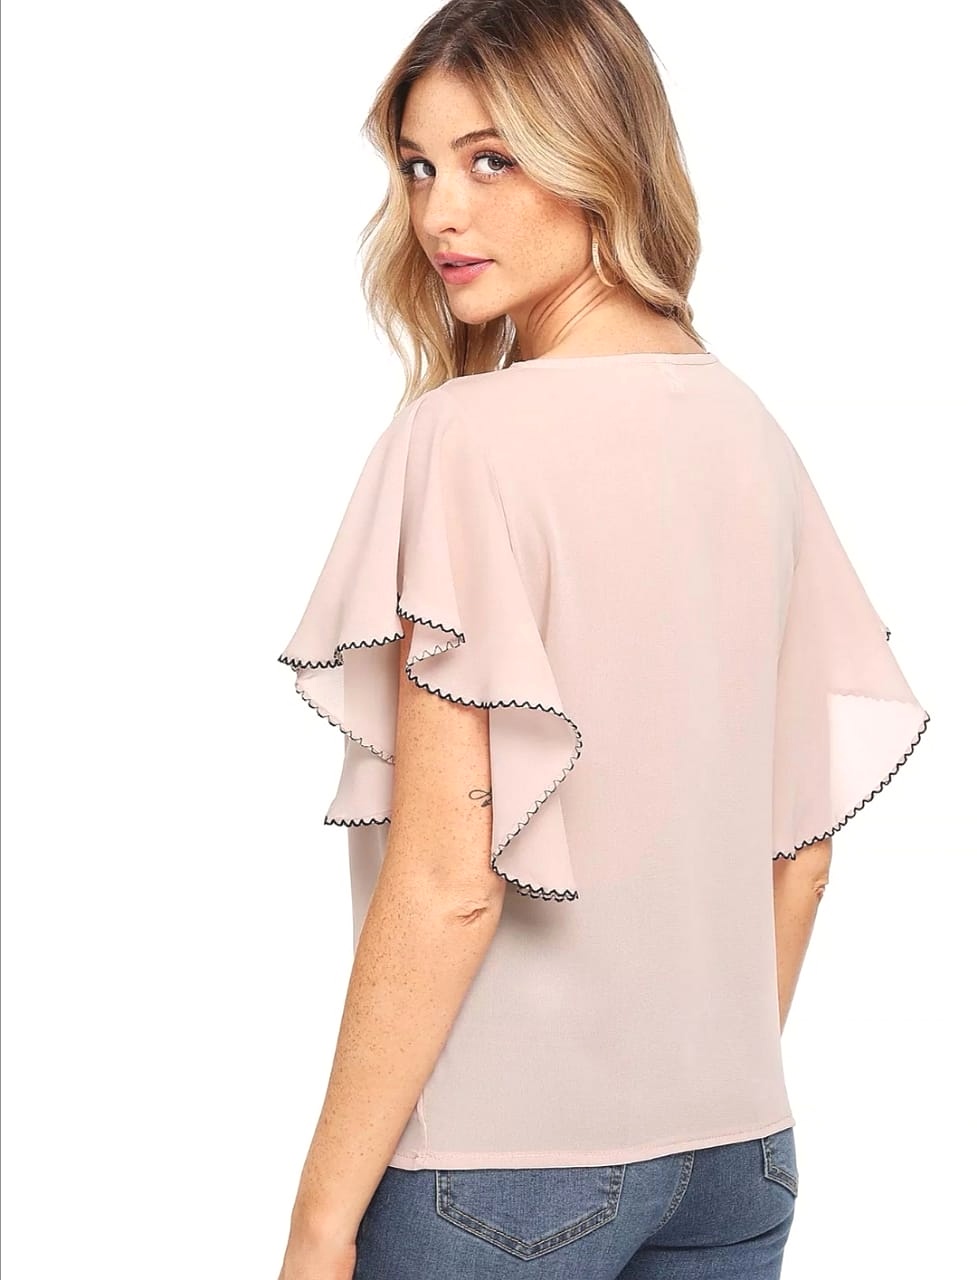 Women's blouse with distinctive sleeves cut